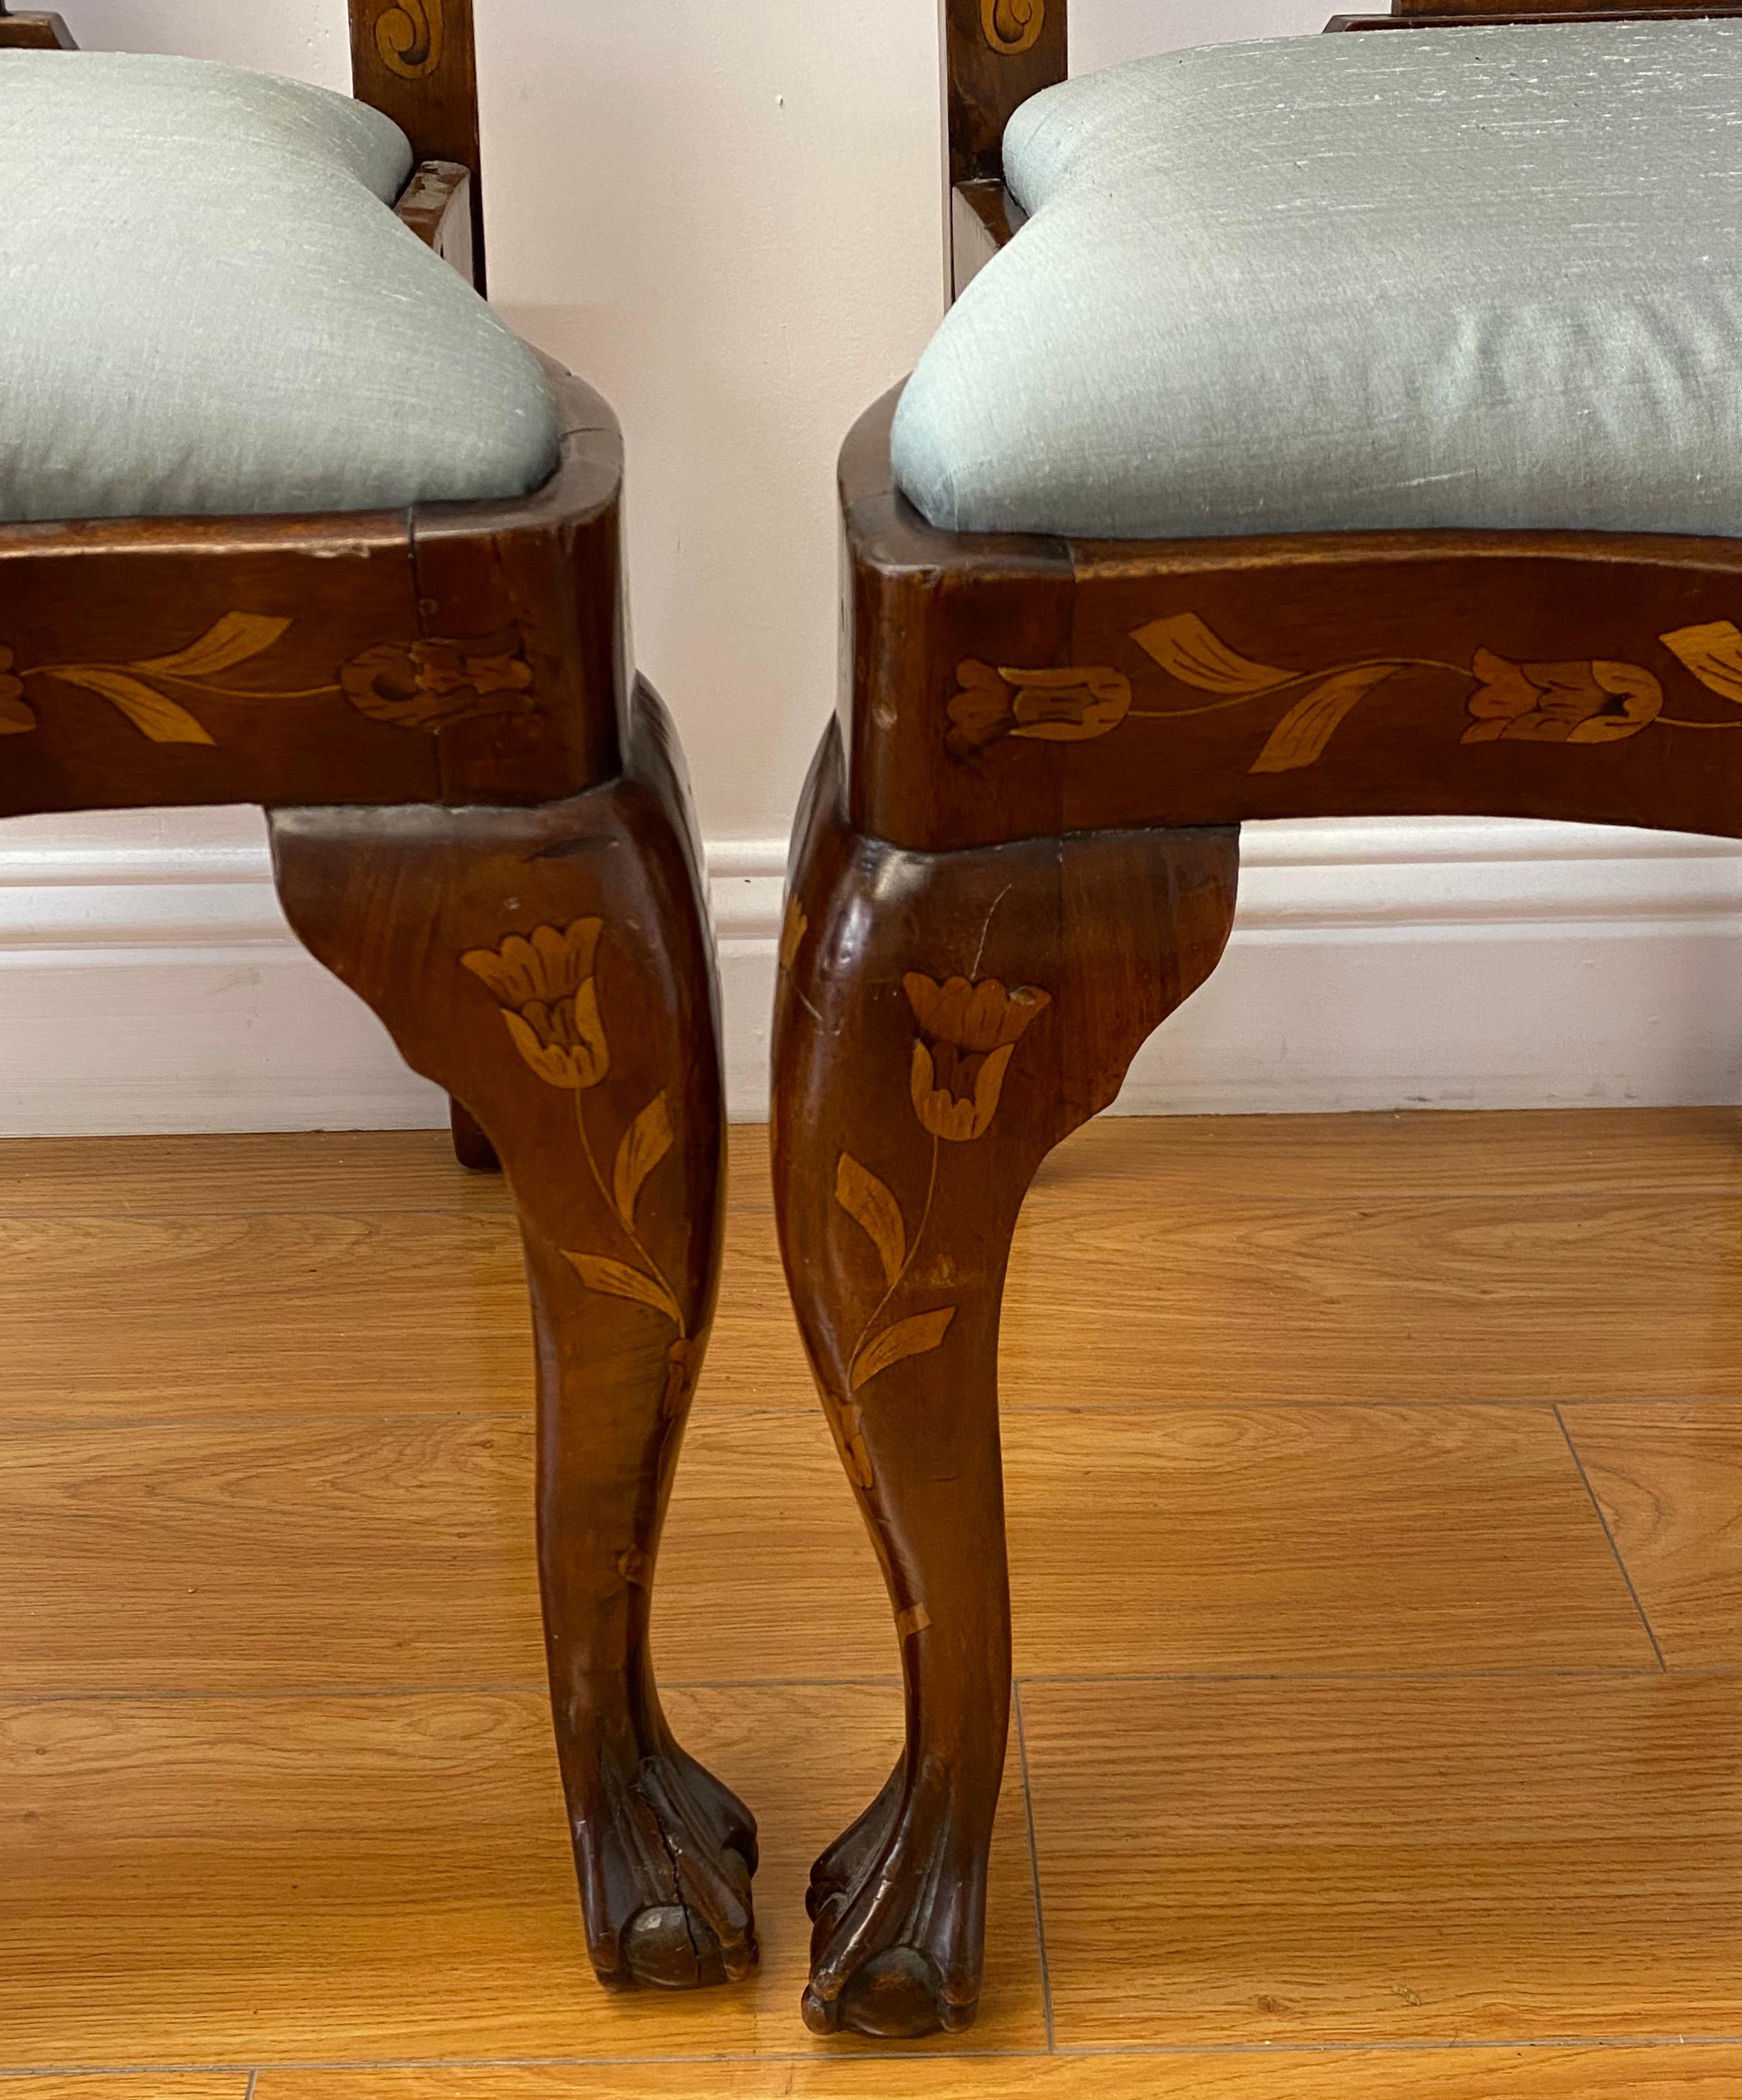 Pair of early 20th century inlaid chippendale style side chairs

Outstanding inlay work featuring floral and fauna motifs on all sides

The frames are carved with Chippendale ball and claw feet

one of the feet shows a split in the wood - This